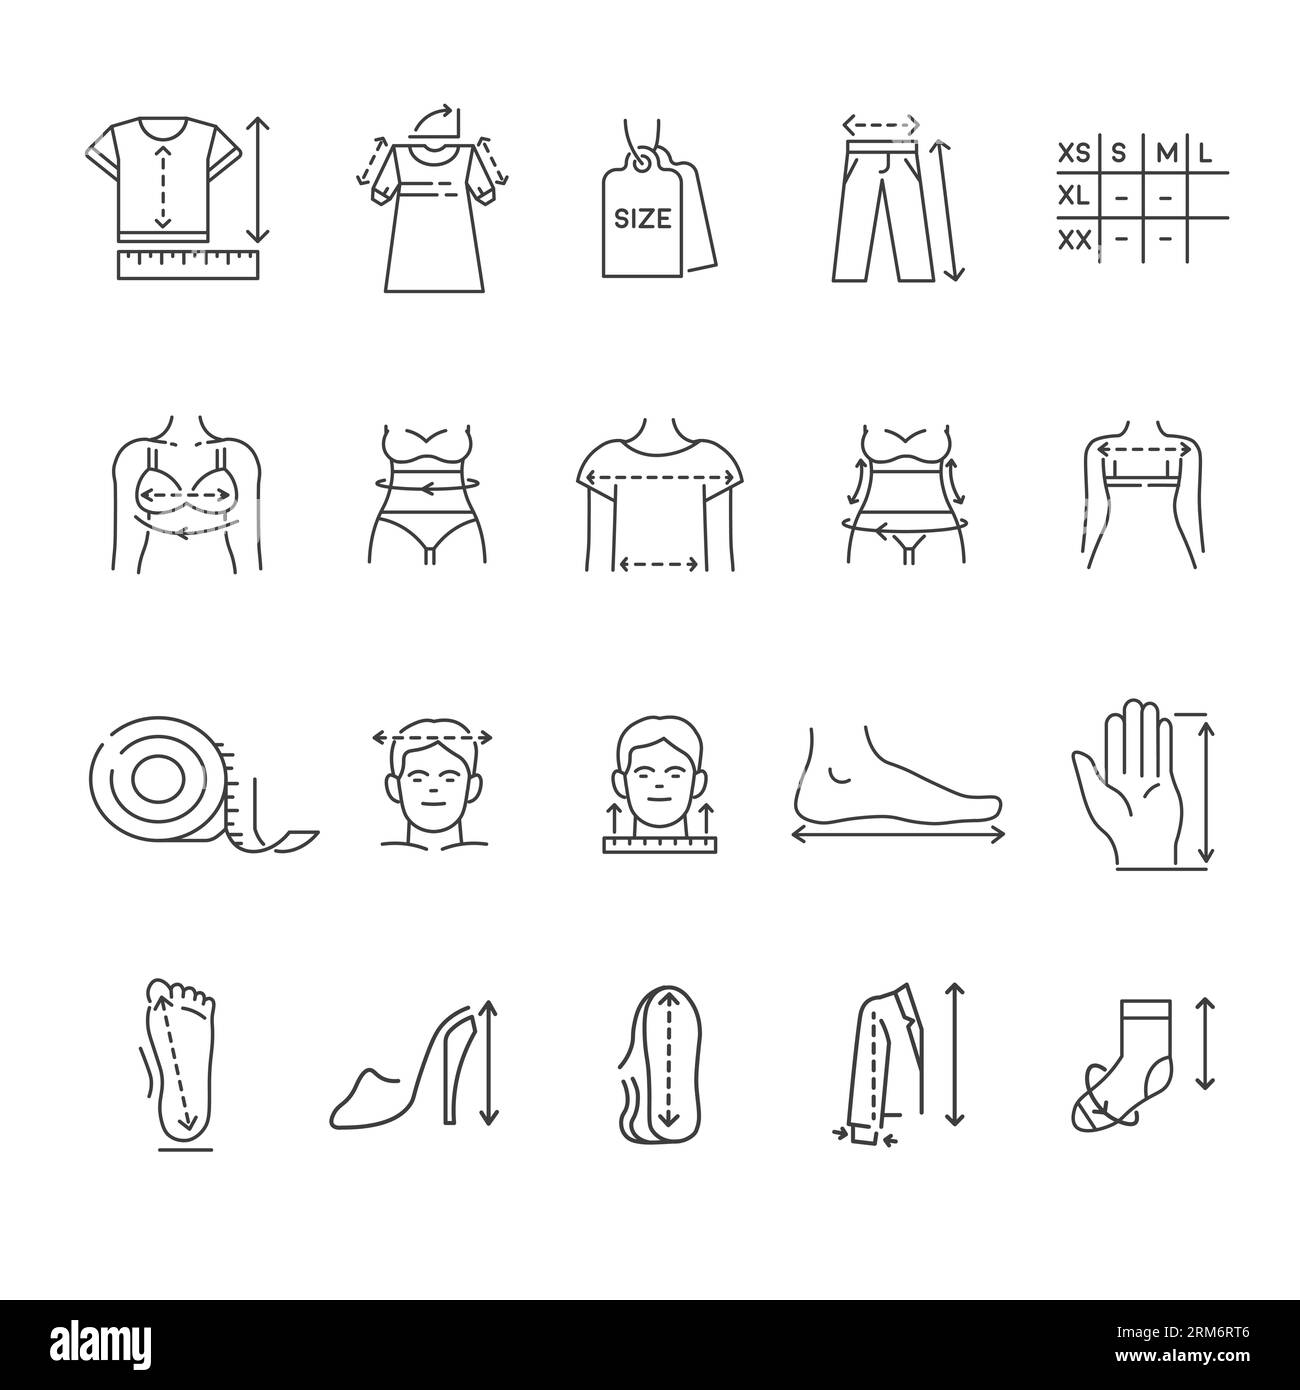 1,402 Clothing Size Chart Royalty-Free Photos and Stock Images